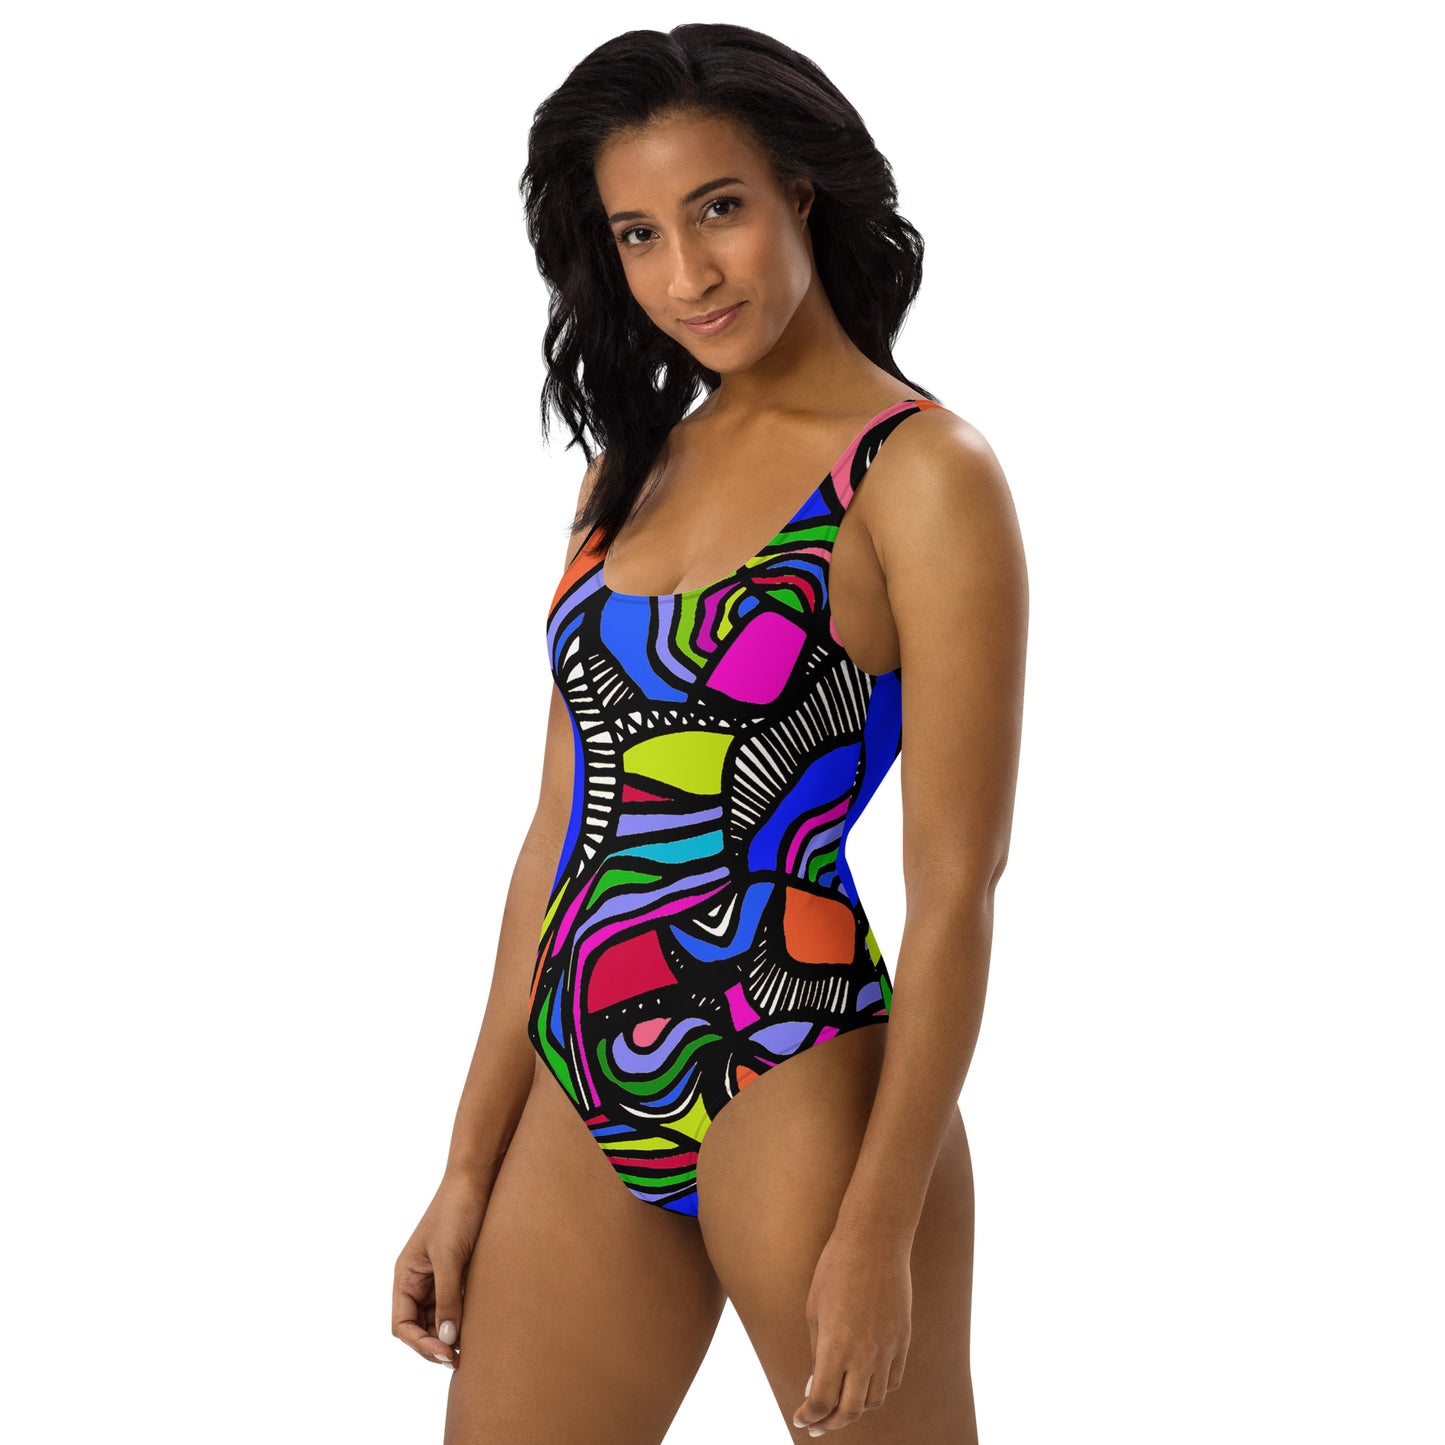 It's a Colorful Whirled One-Piece Swimsuit